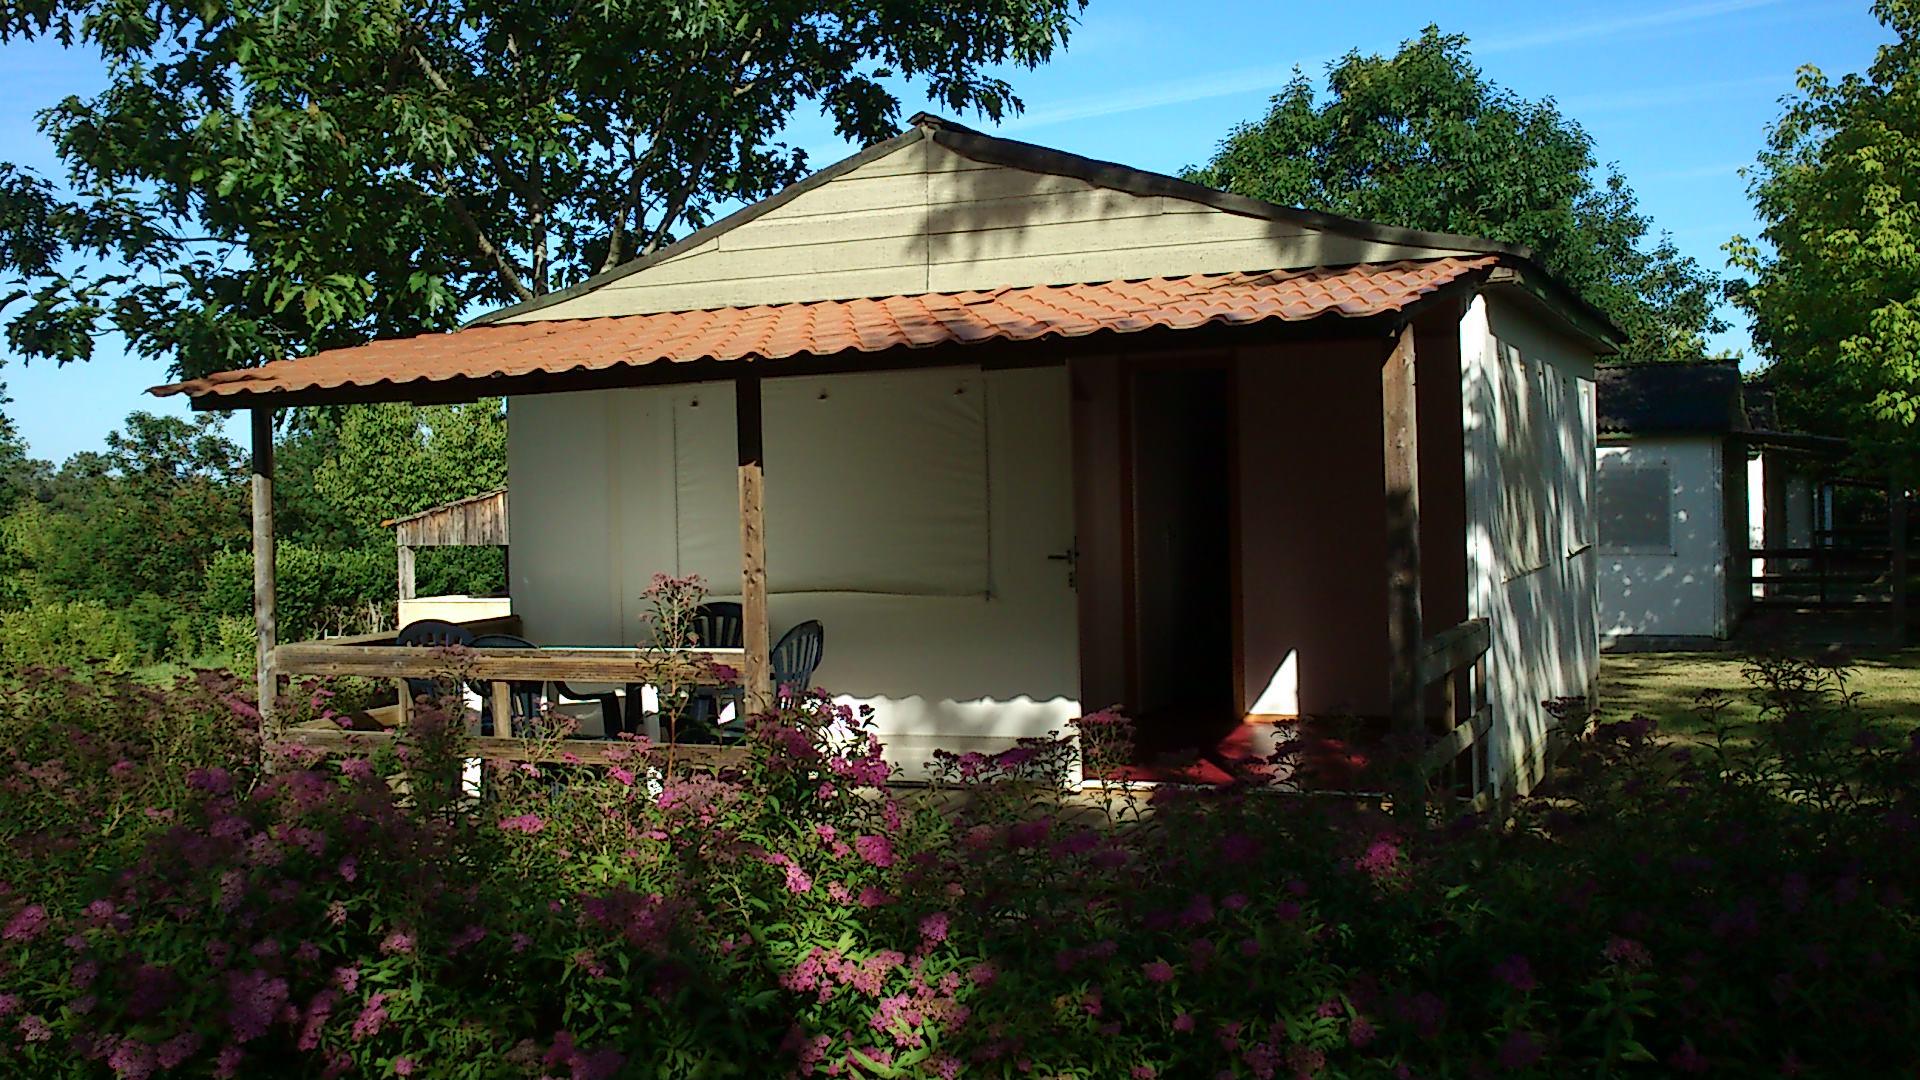 Accommodation - Chalet 2 Bedrooms 25M² - Camping Las Patrasses